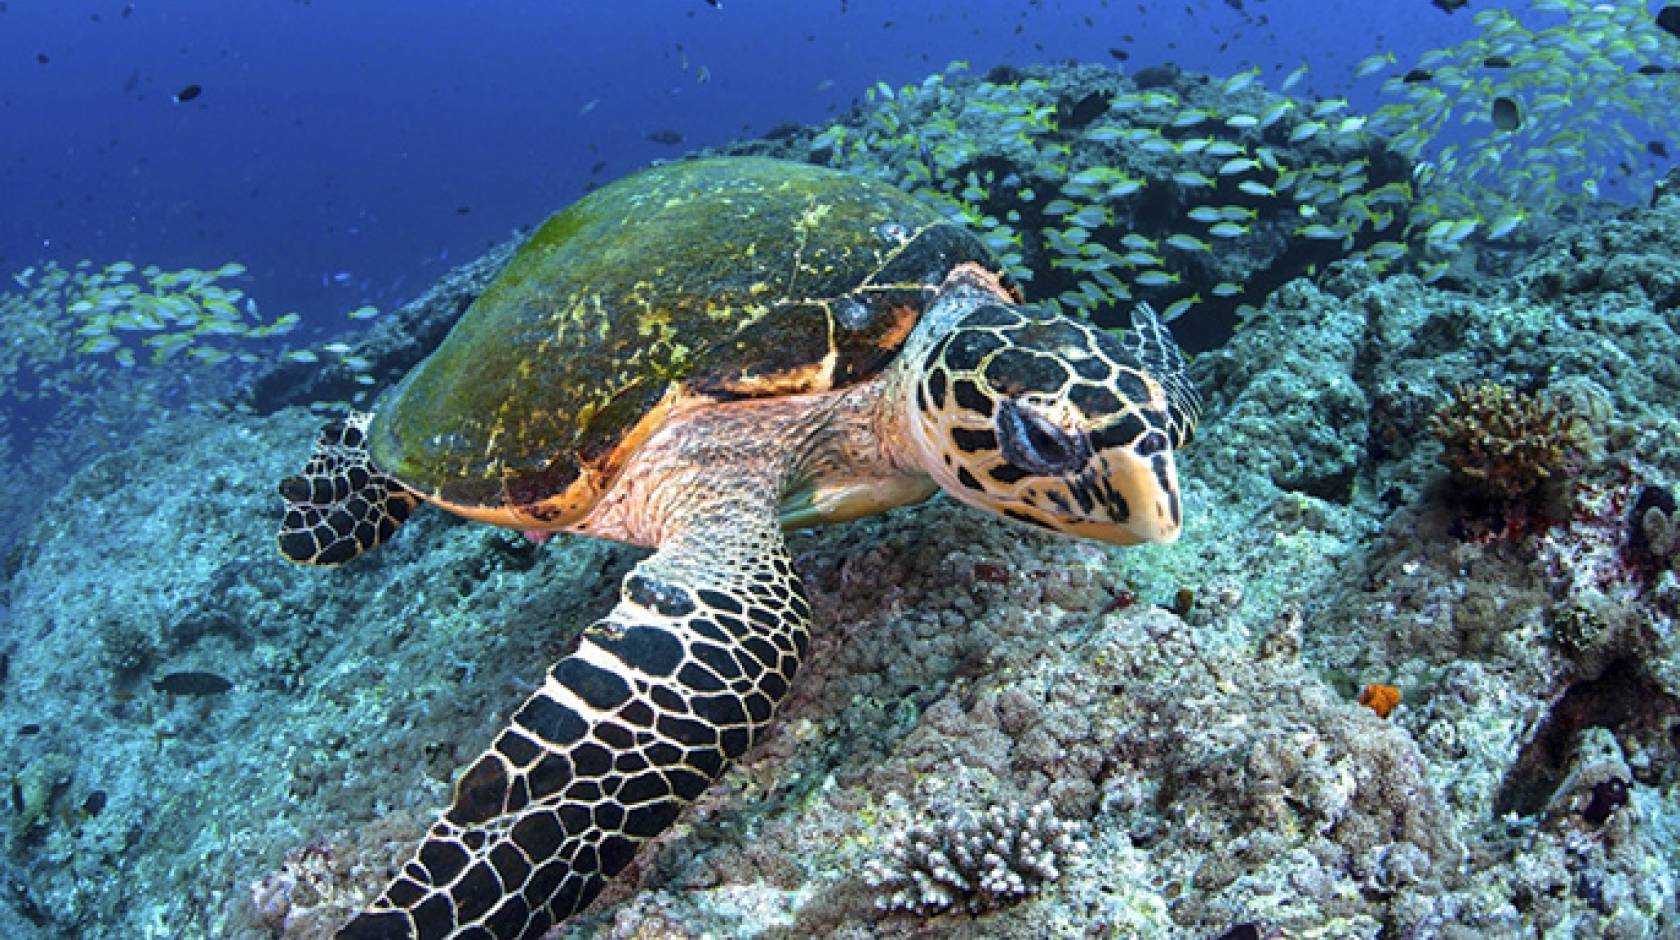 A new study offers strategic guidance on the placement of marine protected areas to meet global conservation goals - See more at: http://www.news.ucsb.edu/2015/016205/protecting-ocean-species#sthash.aMH7GEAd.PcNMUi3Q.dpuf